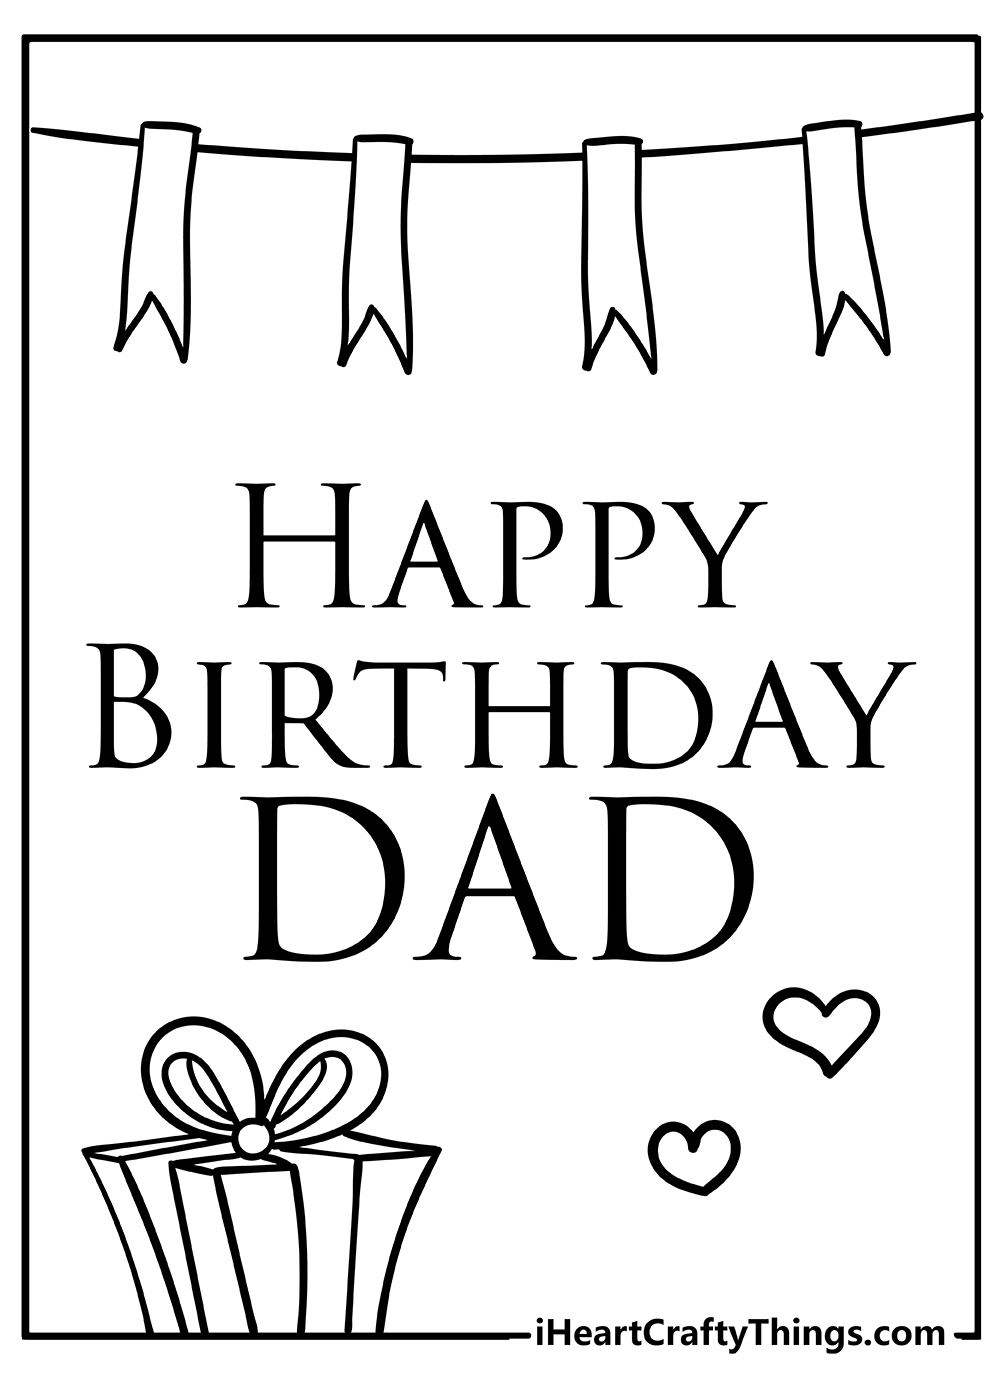 Happy Birthday Dad Coloring Sheet for children free download